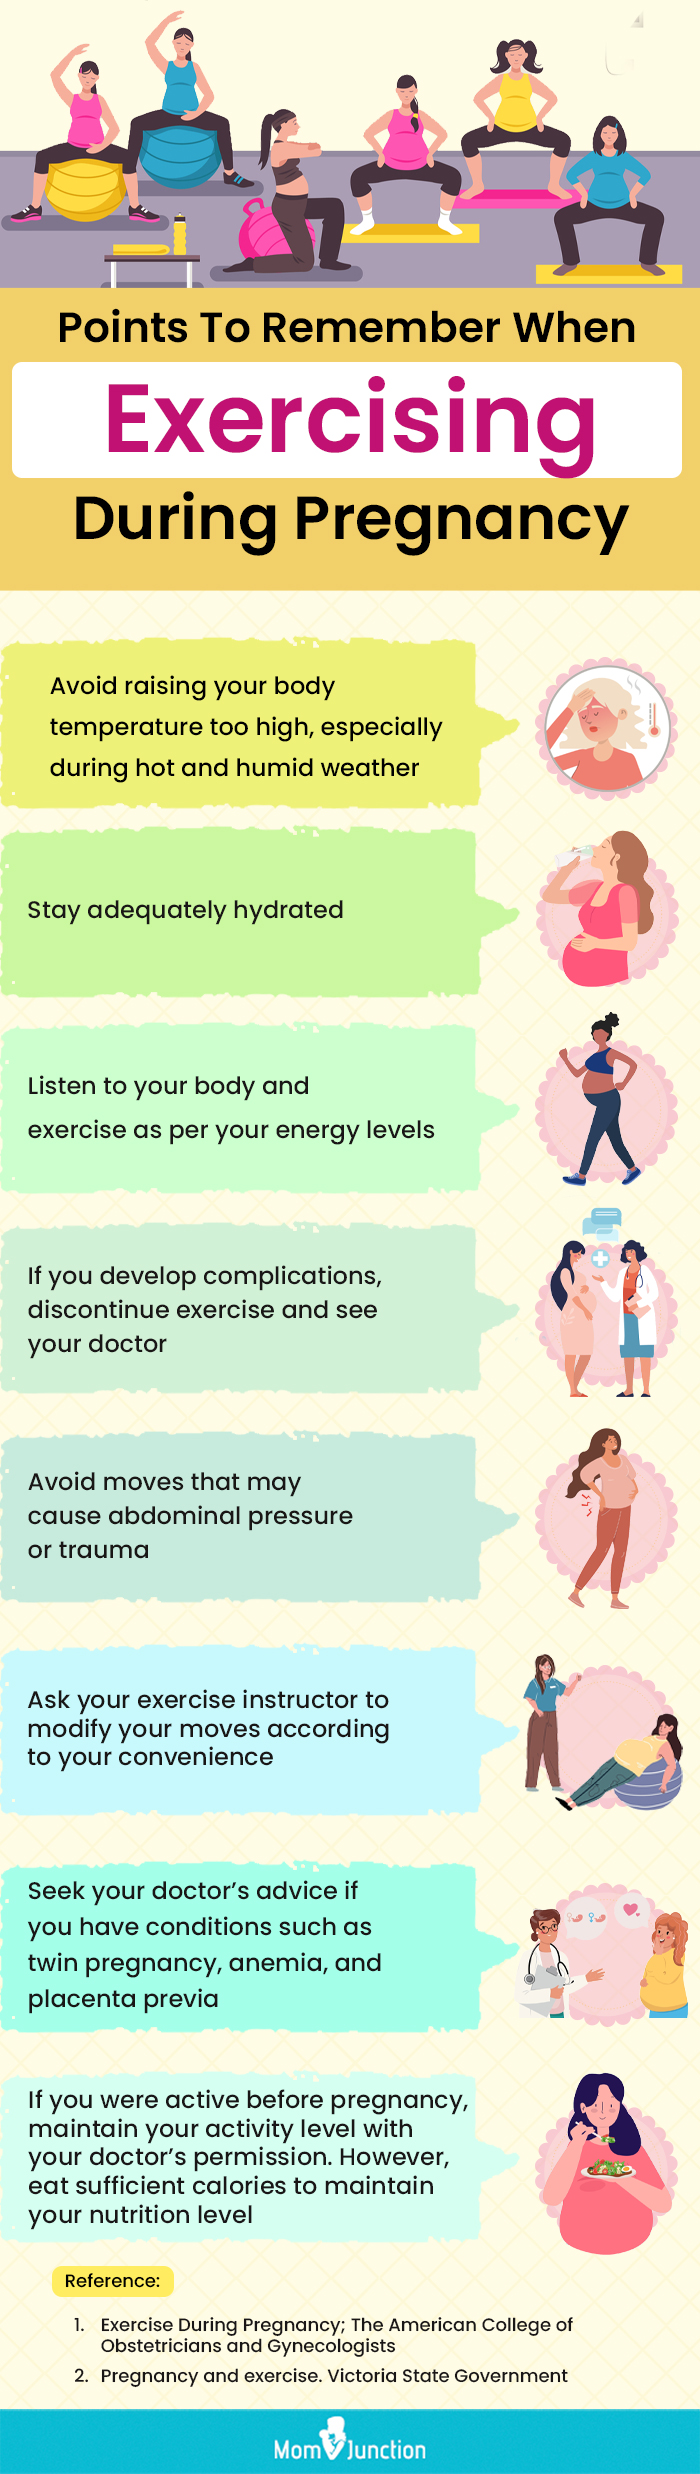 points to remember when exercising during pregnancy [infographic]